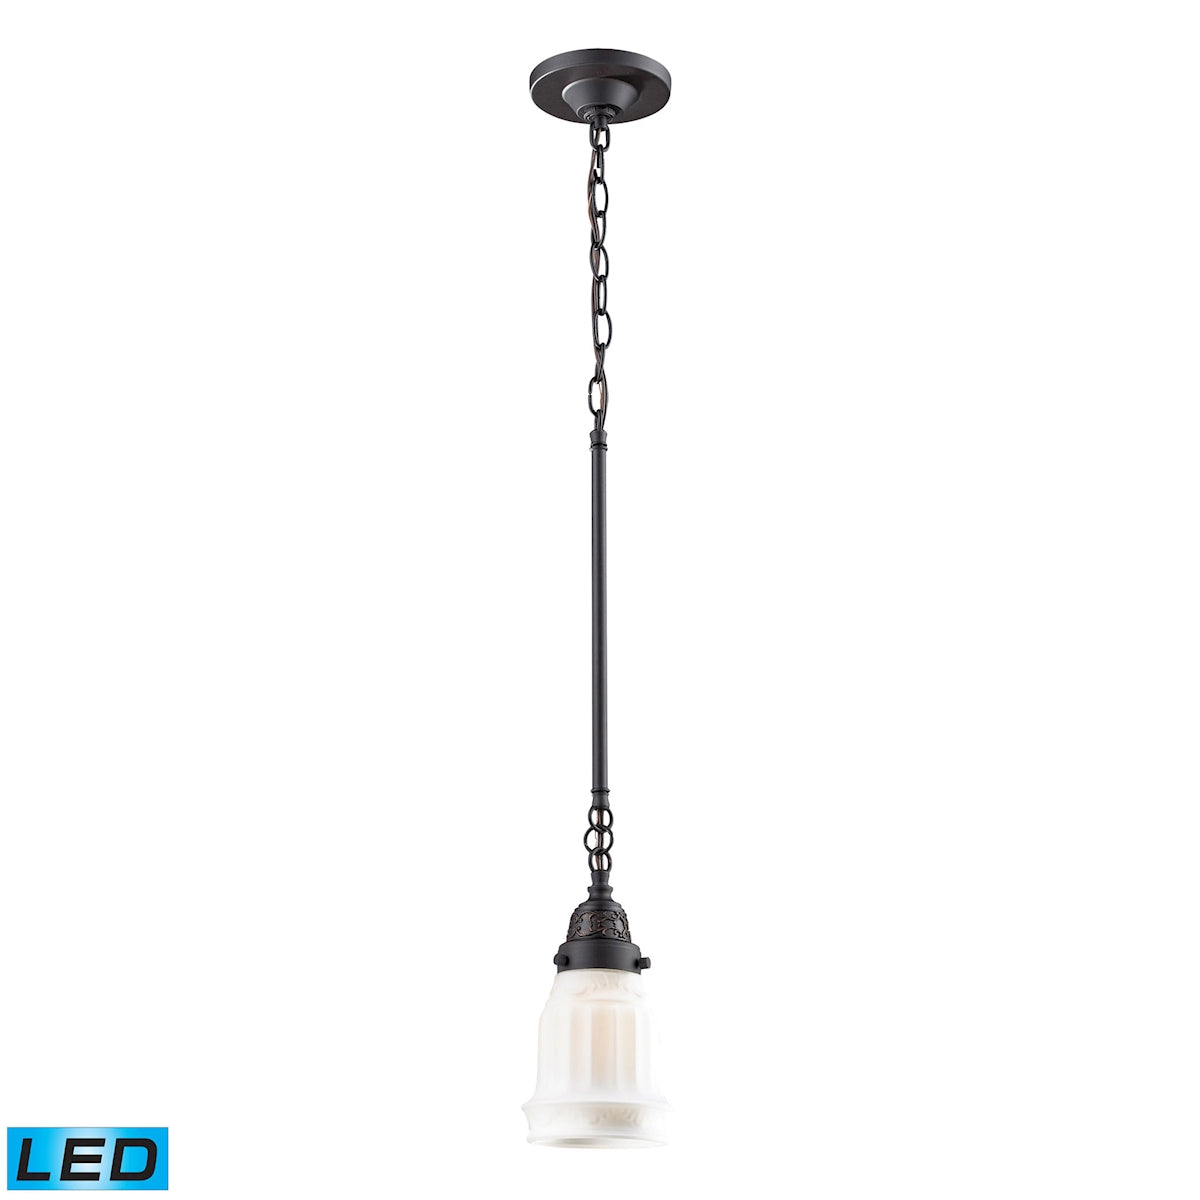 ELK Lighting 66216-1-LED Quinton Parlor 1-Light Mini Pendant in Oiled Bronze with White Glass - Includes LED Bulb